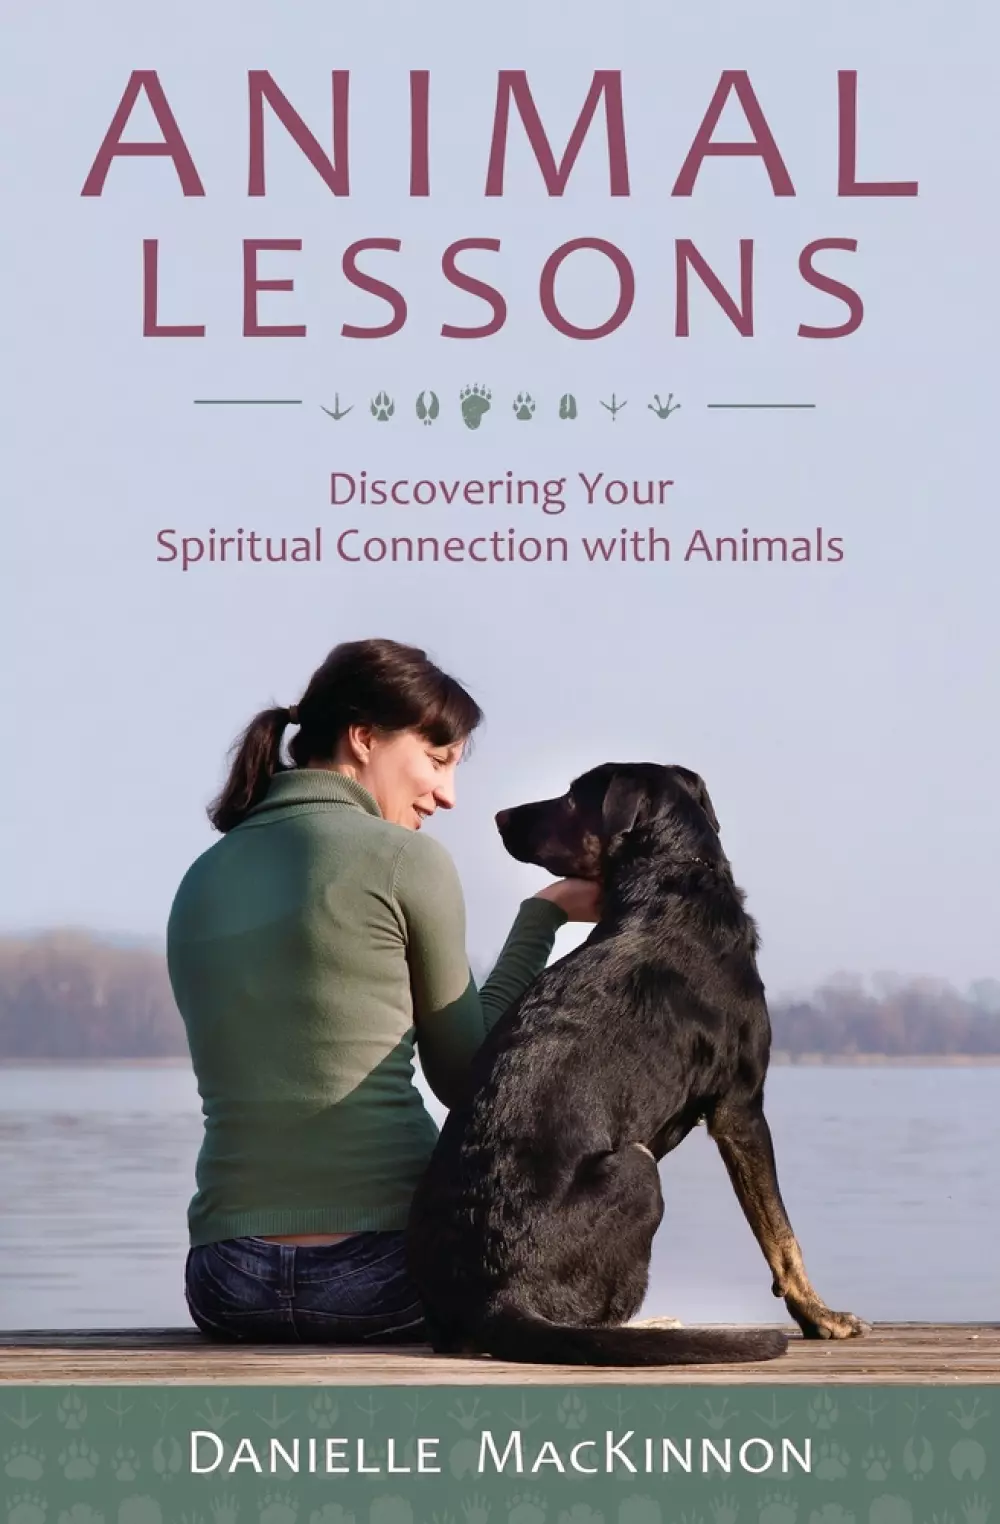 Animal Connection, Spiritual connection with animals, Animal Lessons, Bøker, Urkulturer,sjamanisme & mystikk, Discovering Your Spiritual Connection with Animals